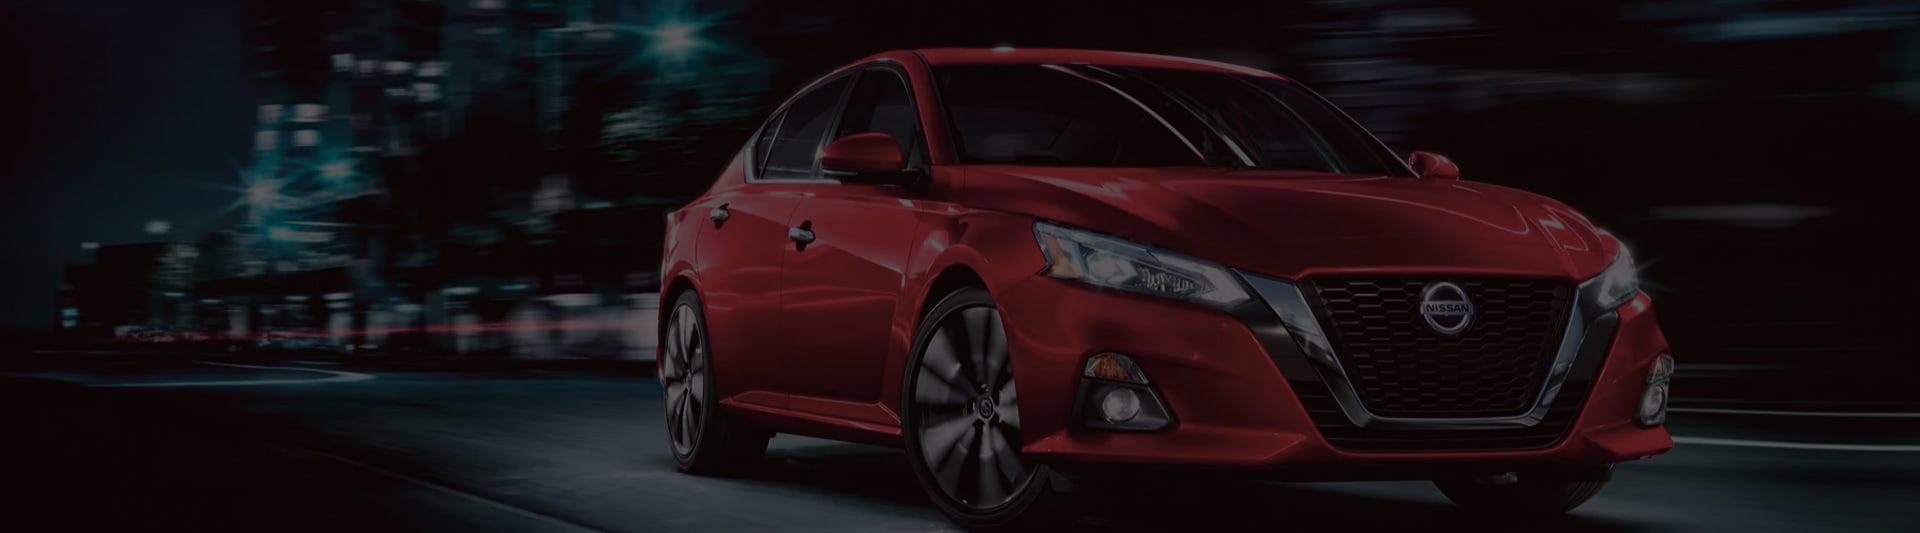 Red Nissan Altima driving through city at night